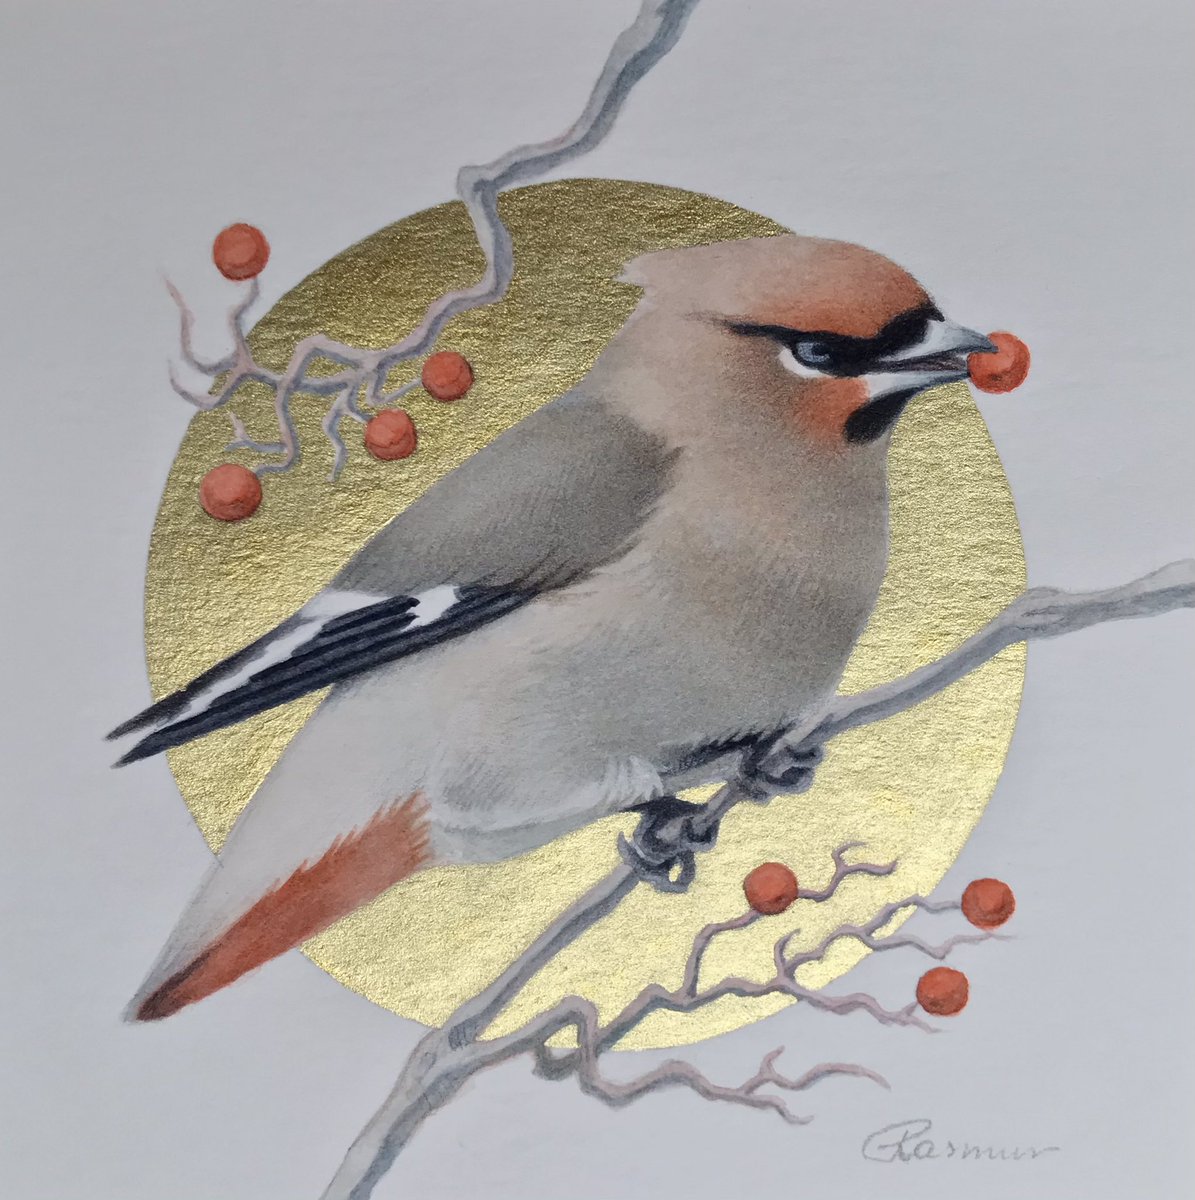 Almost forgot about this little guy I painted the other day. Cedar Waxwing, watercolors and gold ink. #birdwhispererproject #birdart #cedarwaxwing #birdwhisperer